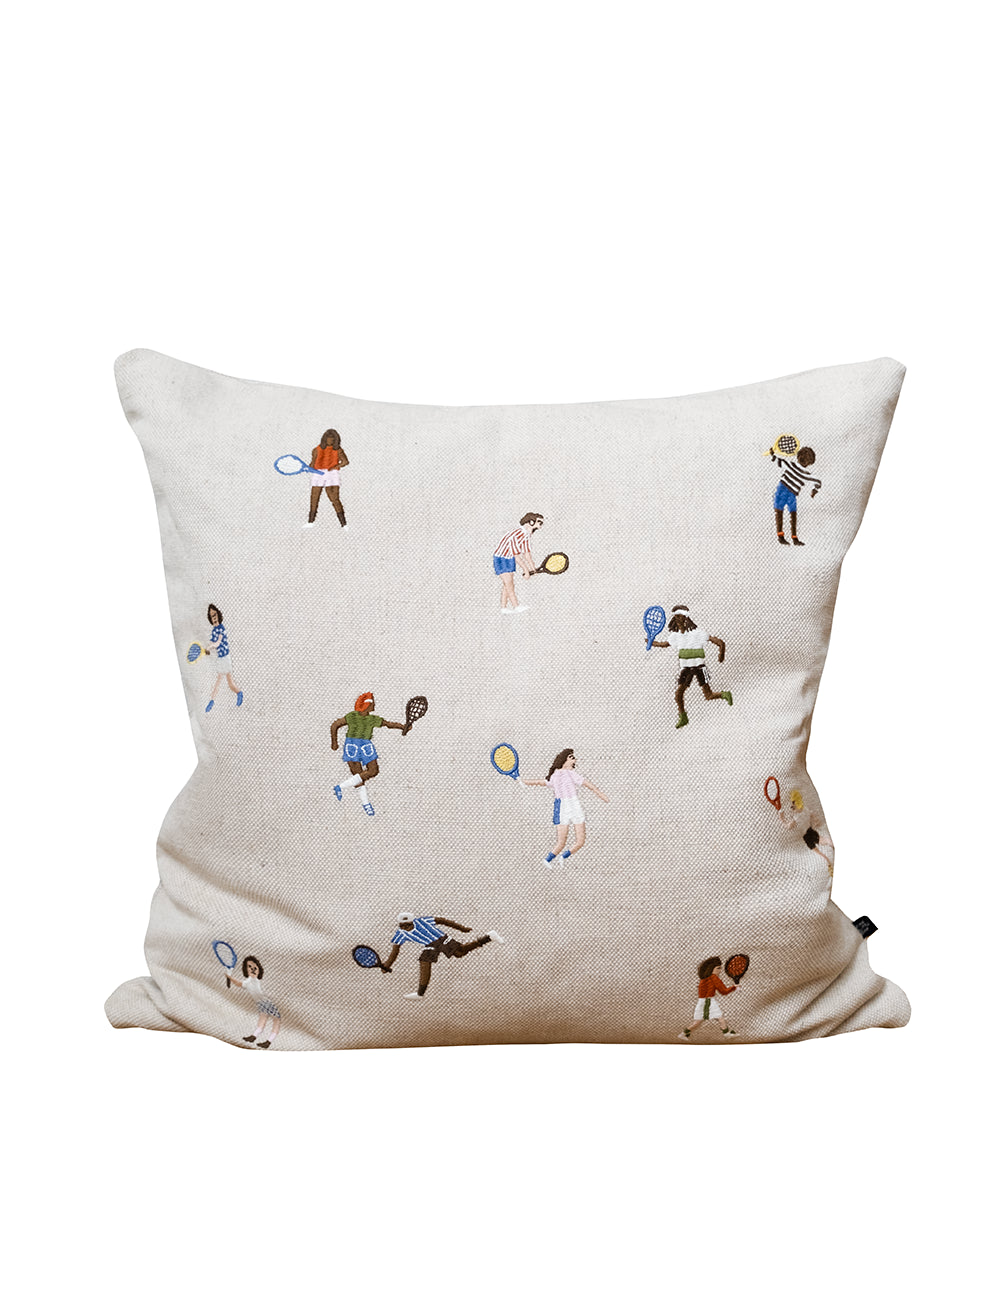 Tennis Embroidered Cushion COVER